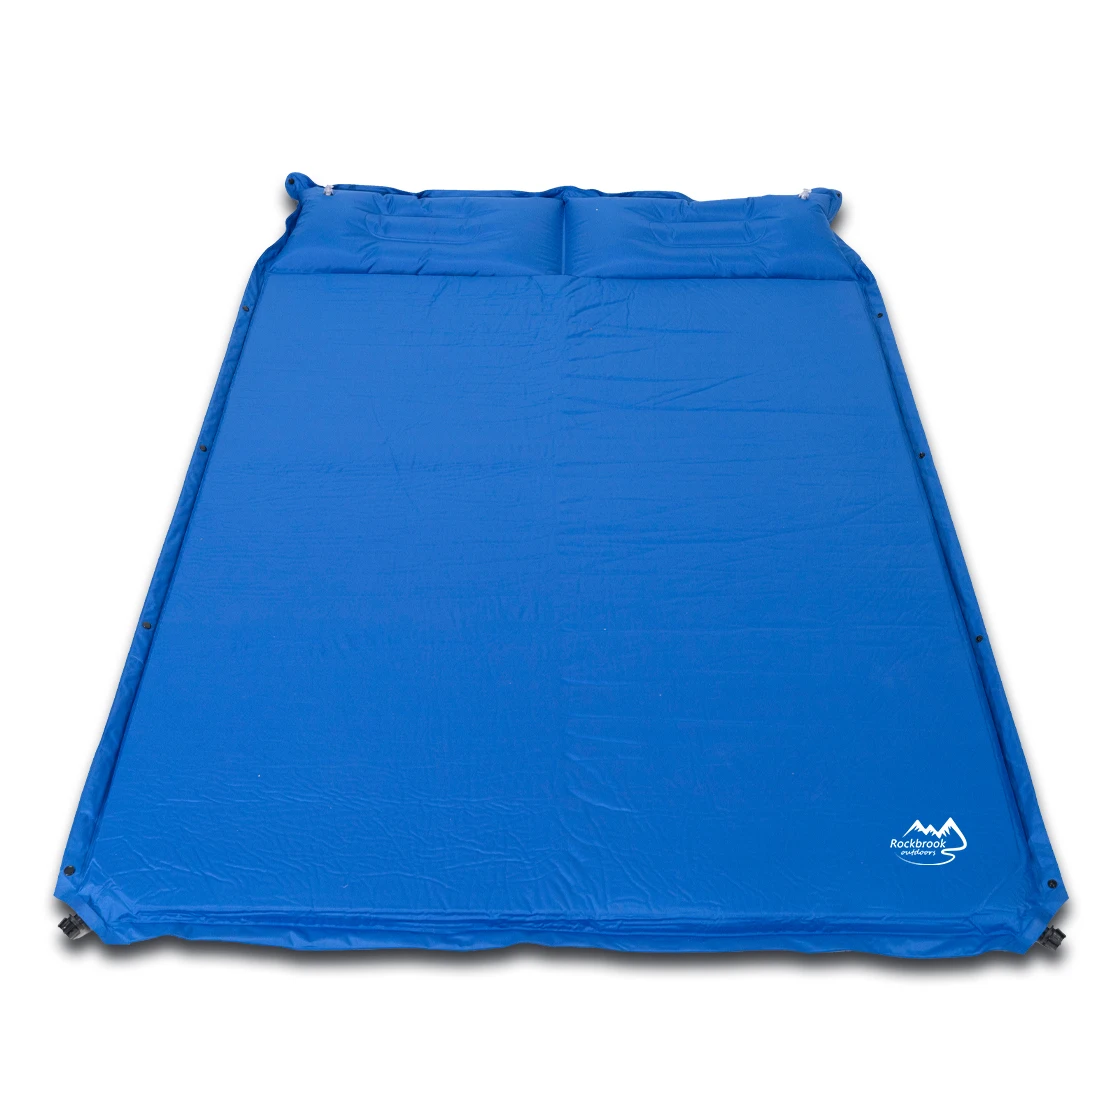 

Deluxe Lightweight 2 Person Extra Large Extra Long 4Season Sleeping Pad Mattress Widen Waterproof Foldable Outdoor Camping Mat, Blue